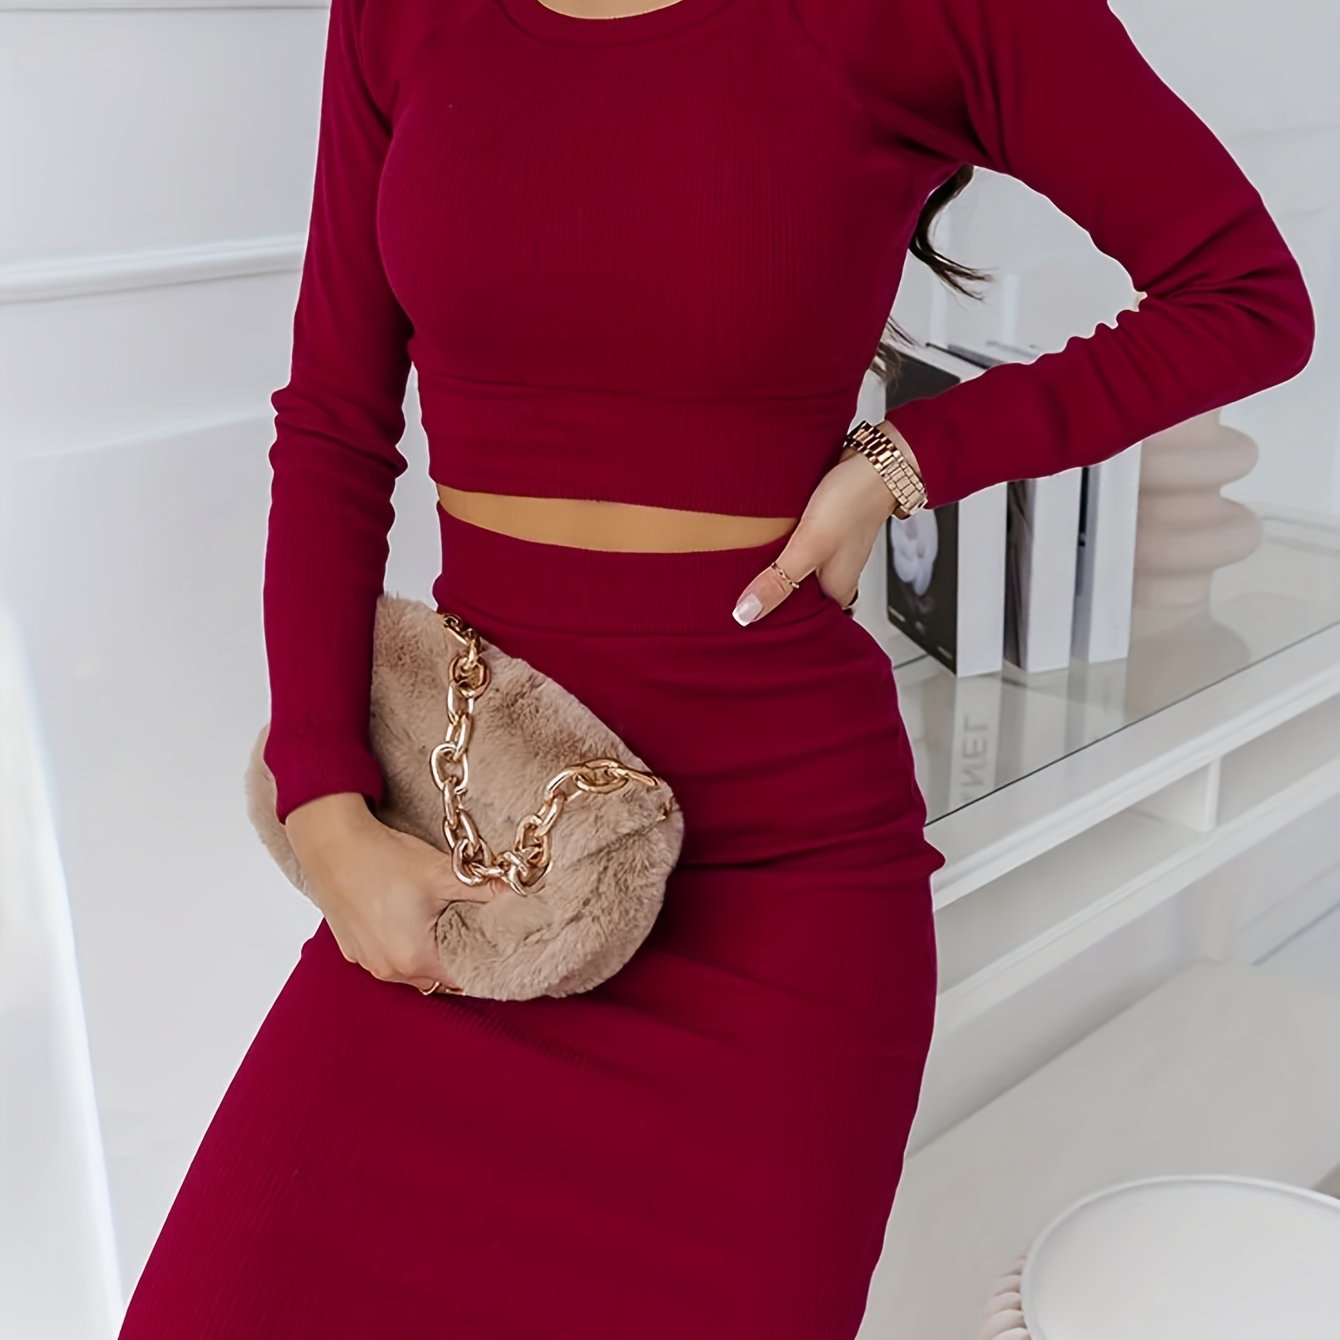 Casual Solid Two-piece Set, Crew Neck Long Sleeve Crop Top & High Waist Skirt Outfits, Women's Clothing